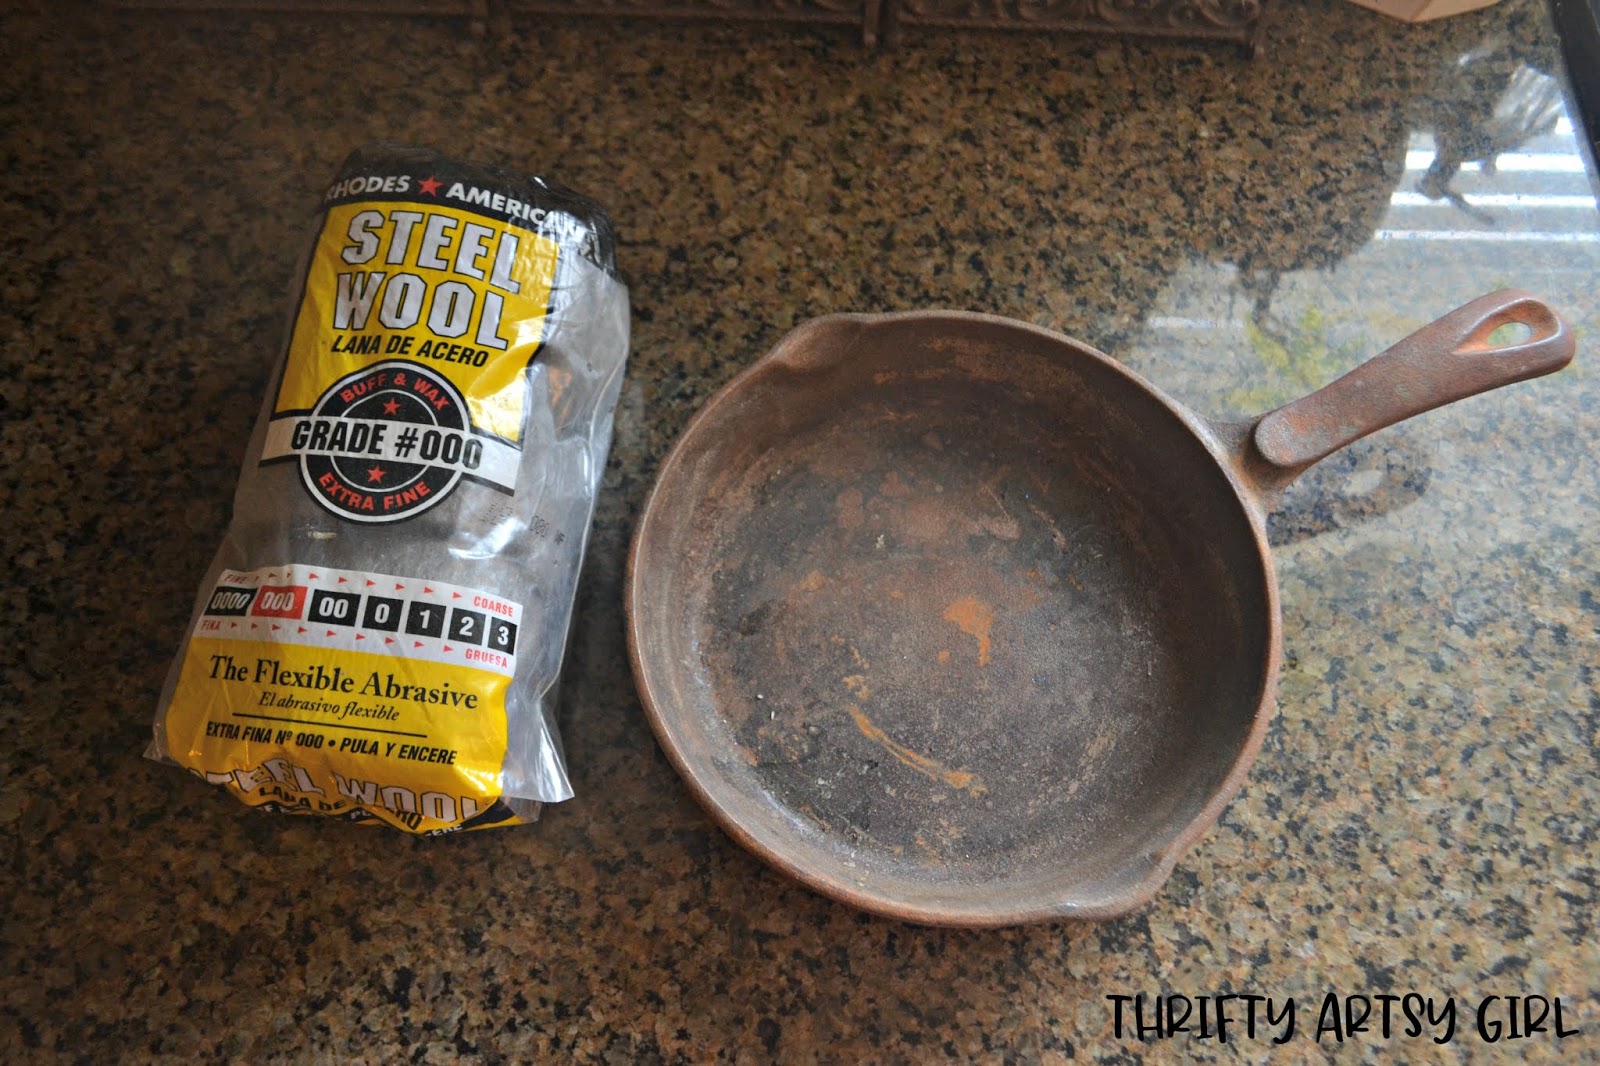 How to clean a rusty cast-iron skillet